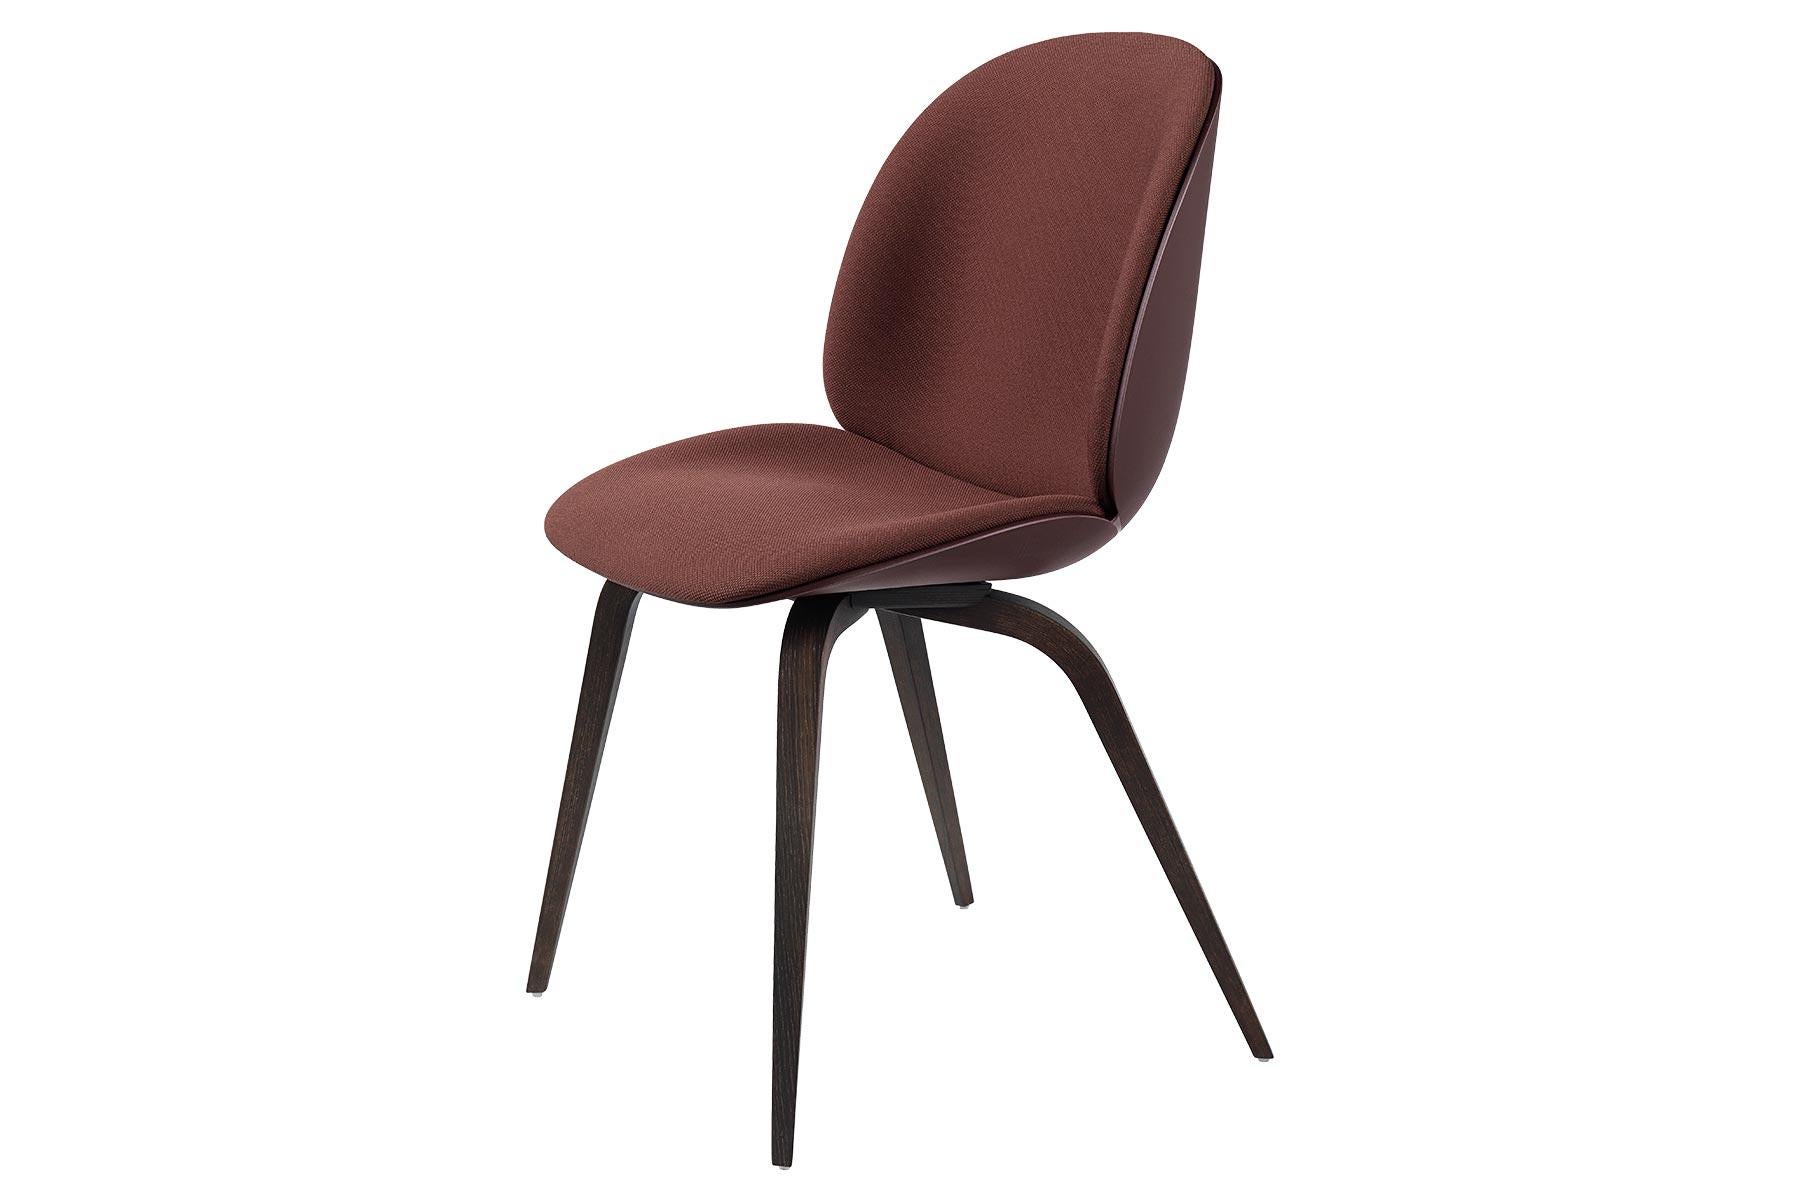 Looking closely at the anatomy of the beetle insect, characterized by its solid outside and soft inside, the front upholstered Beetle chair possesses all attributes. The front upholstered Beetle chair holds the same soft core as the fully